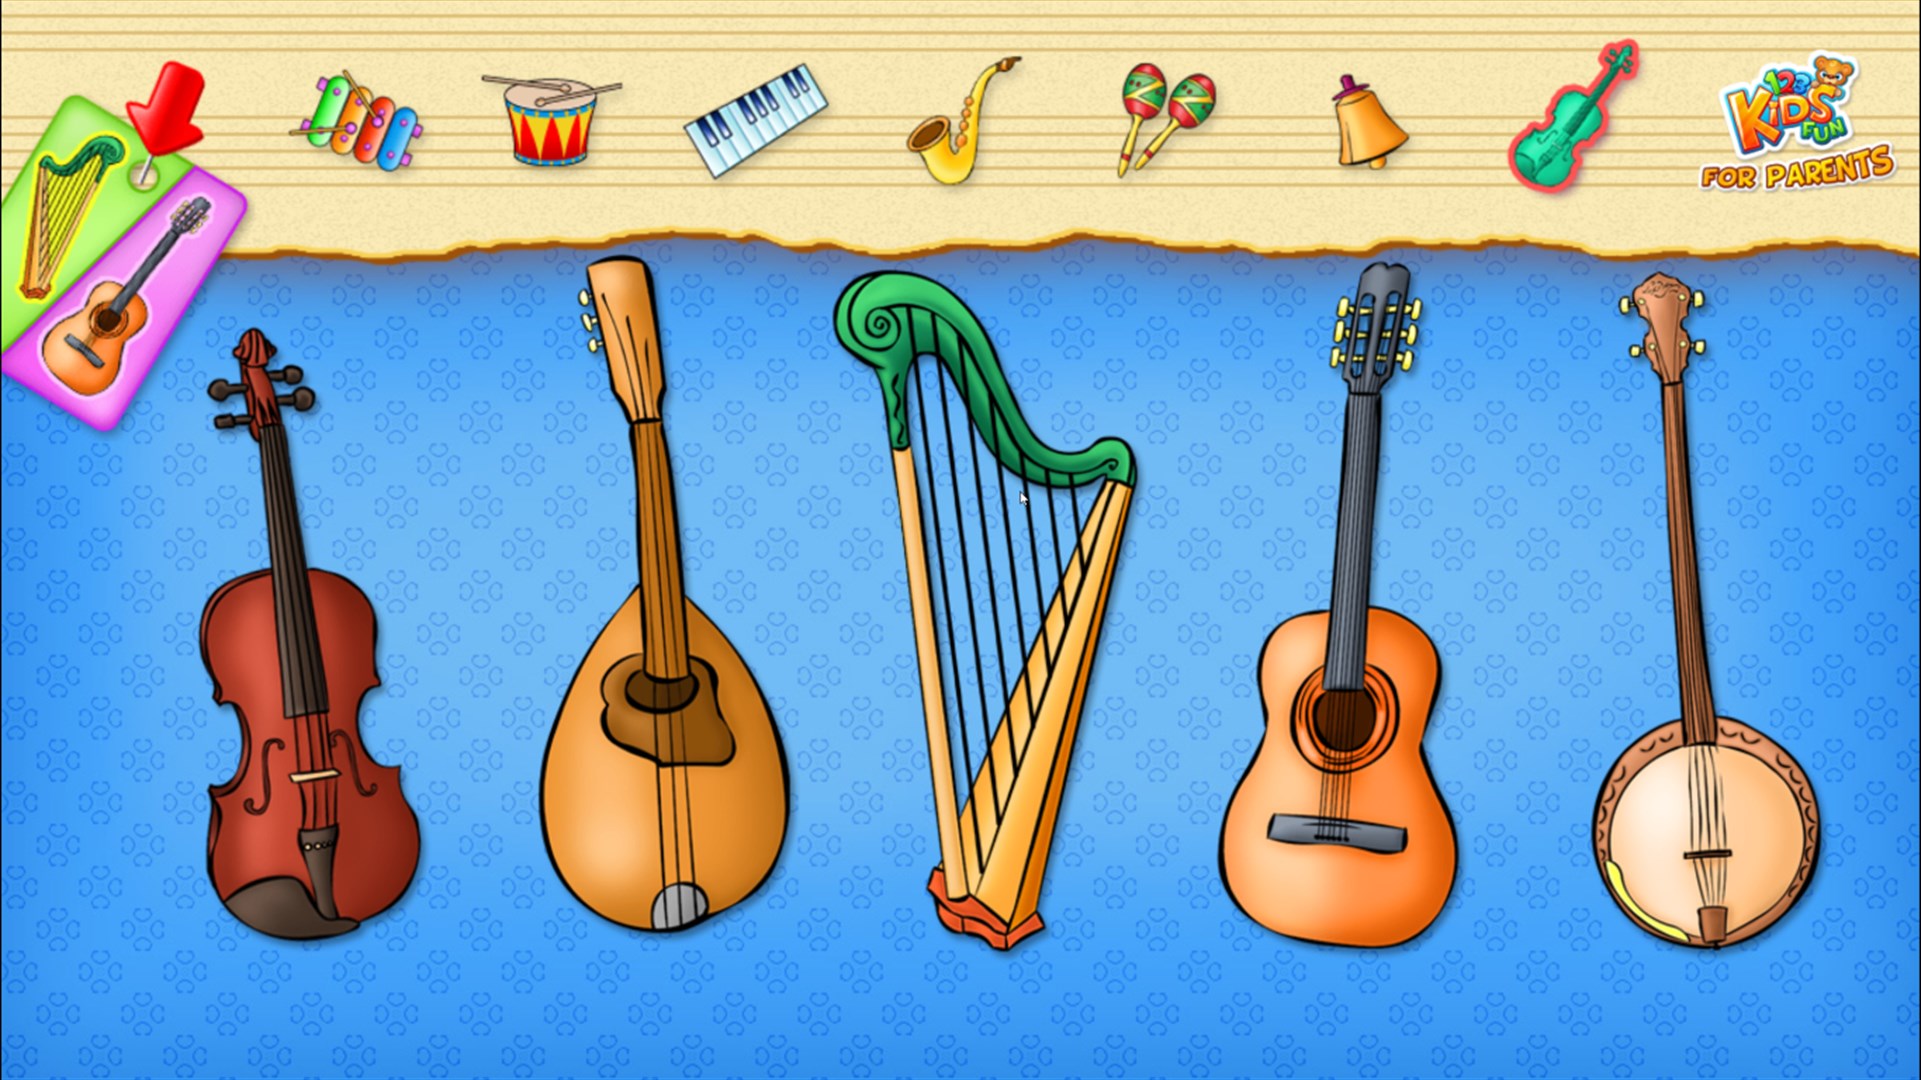 Sounds of Musicial Instruments  Kids Learning Videos 